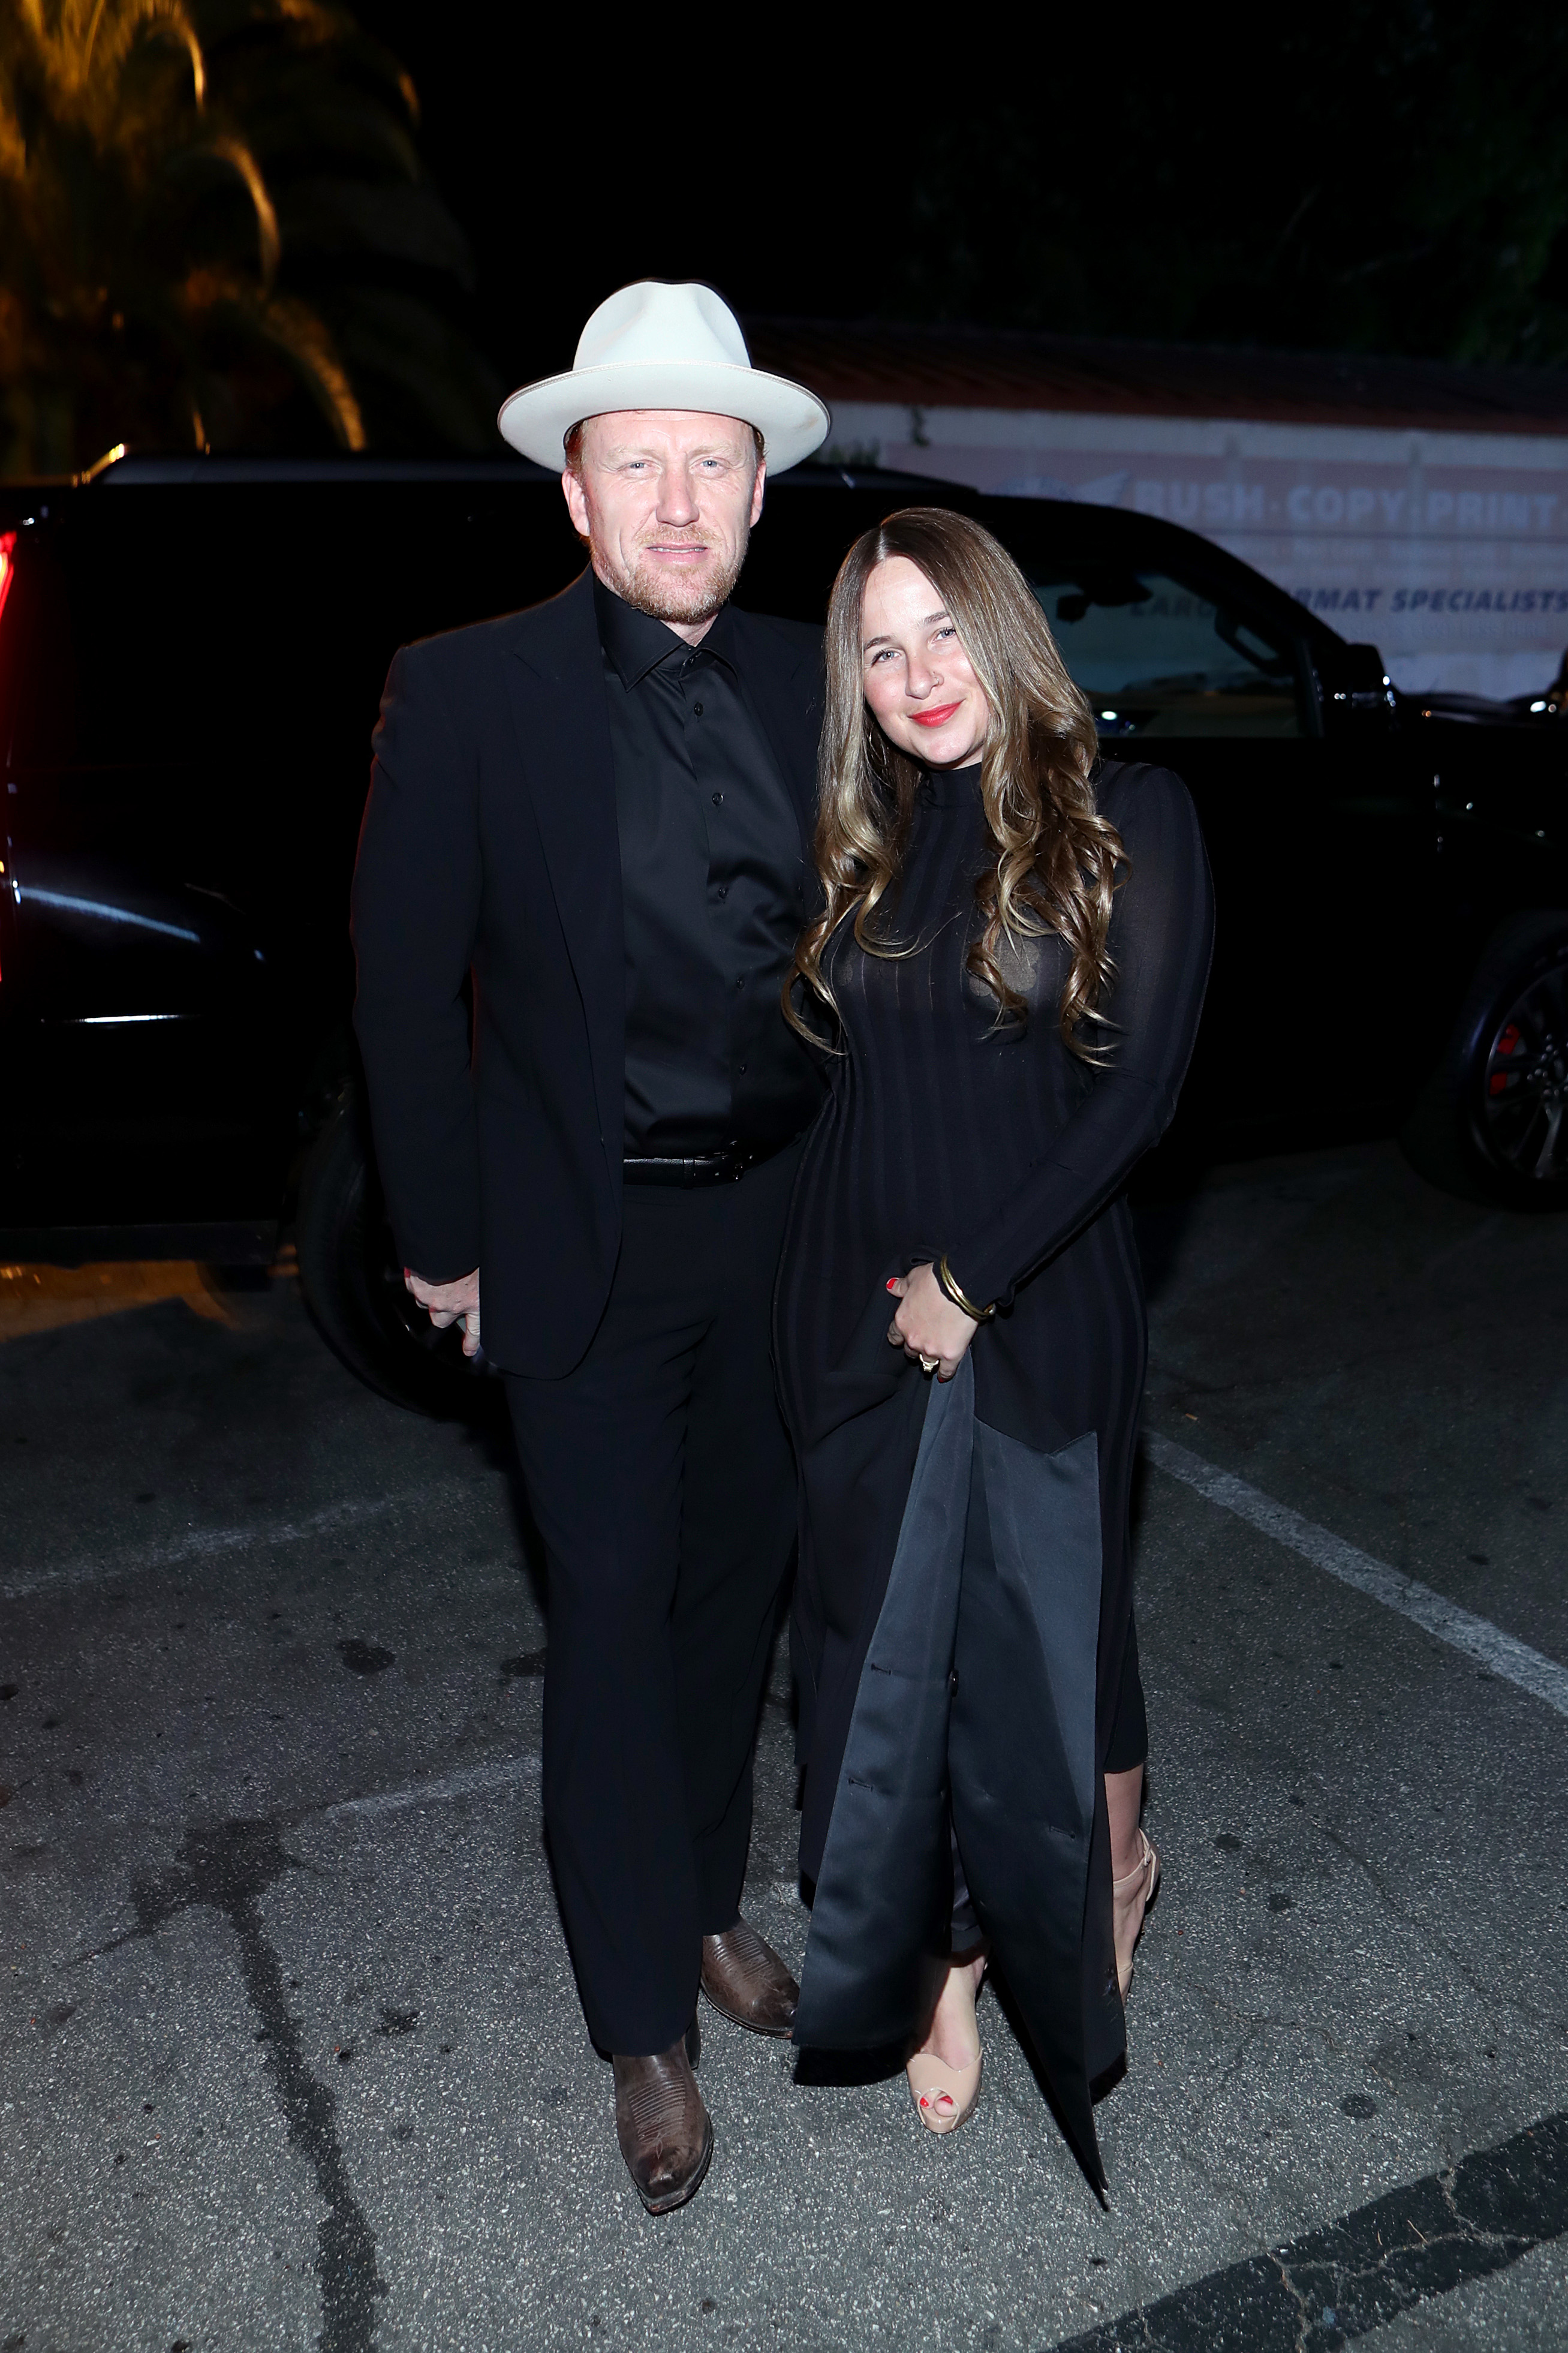 (L-R) Arielle Goldrath and Kevin McKidd attend The Art Of Elysium Presents WE ARE HEAR'S HEAVEN 2020 at Hollywood Palladium, on January 4, 2020, in Los Angeles, California. | Source: Getty Images